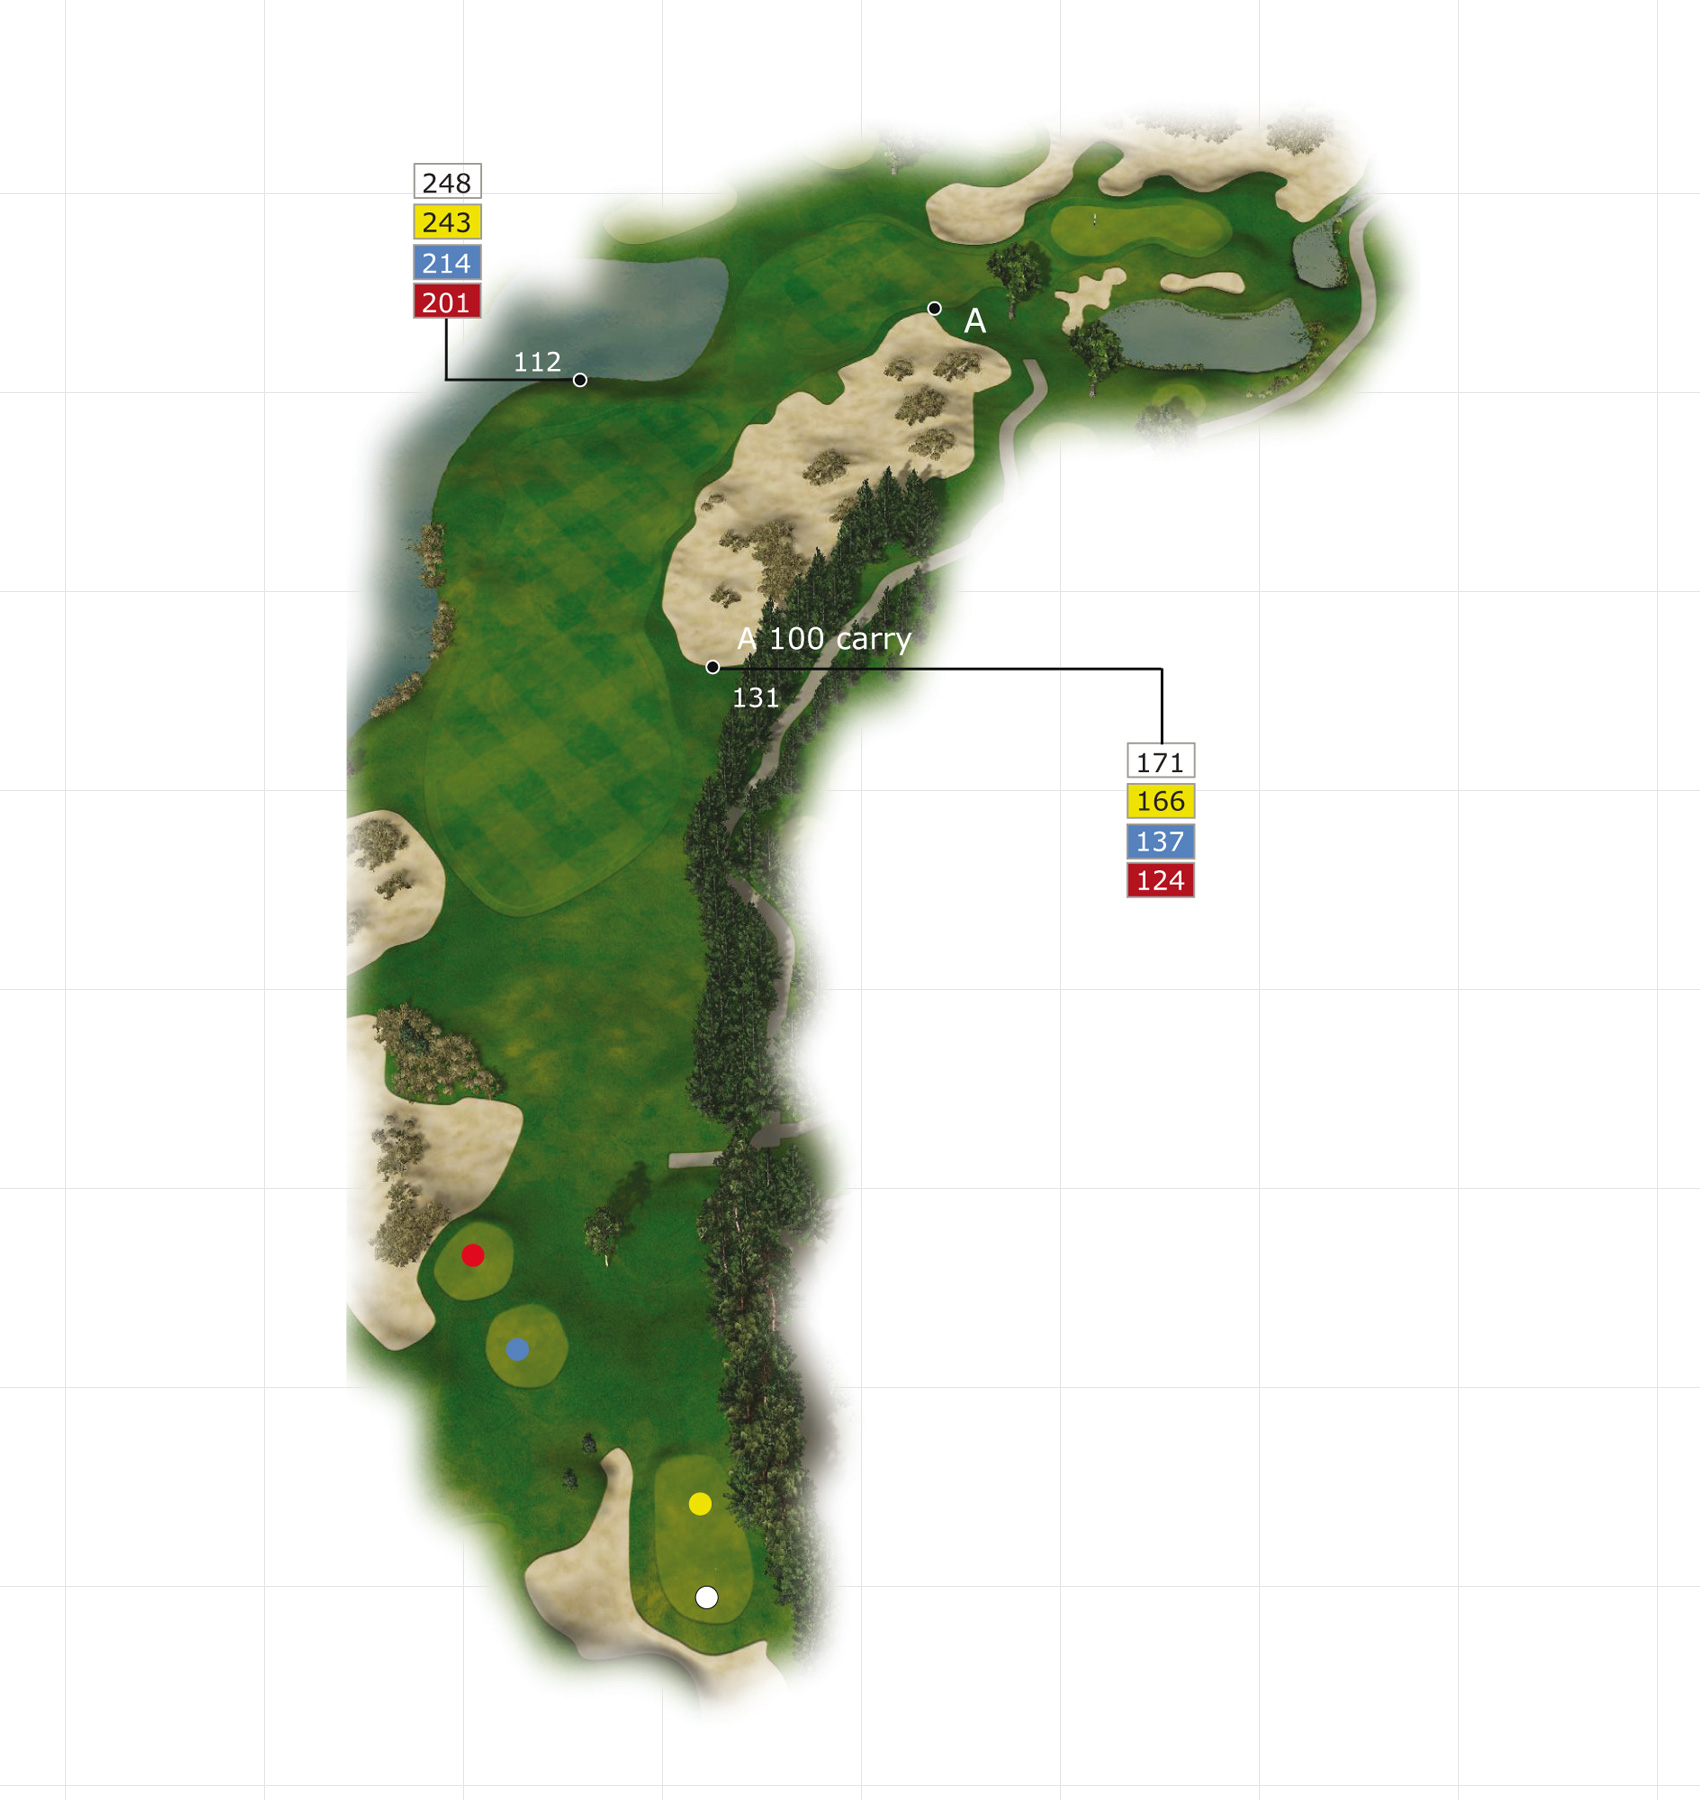 hole16.png